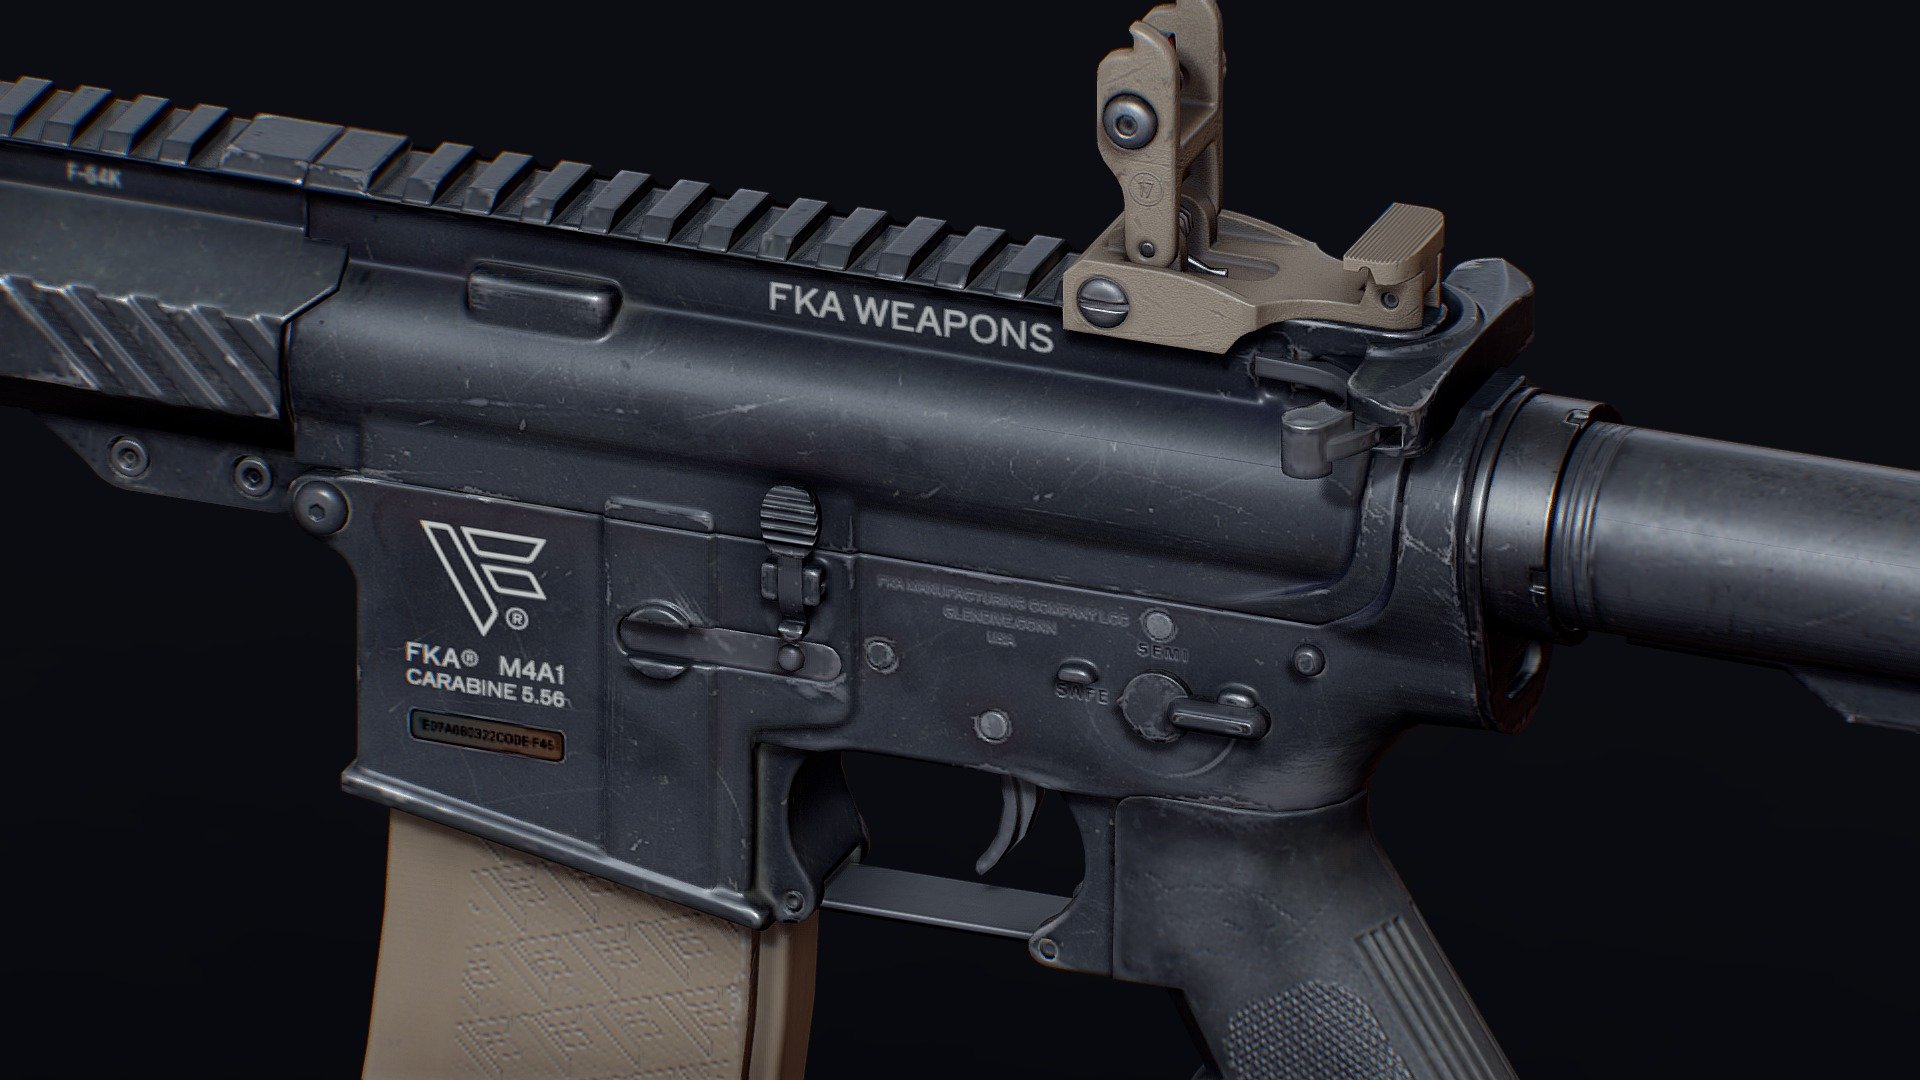 Game-Ready PBR(Metal-Rough)AR15 with attachments. Model is ready for rig and has modeles inside parts(shutter, magazine gate).
Asset equiped with textures: Rifle(4k) Silencer(2k), Sight(4k), Tactical Grip(2k)
*Check rendered images for 4k resolution: https://www.artstation.com/artwork/NGokNb . Model in 3d viewer in 1k resolution.

All trademarks in this model are fictitious, feel free to use this item in any commercial or non-commercial projects.

UV has overlaps.

Polycount: Rifle - 13500 Tris. Sight - 4660 Tris. Silencer - 782 Tris.

Tactical Grip - 660 Tris. Uv with overlaps. Also attached are screenshots of the standard lighting (e.g. environment map Panorama).
Please contact us with any questions and issues. Hope you Enjoy!



Attached Archive has: fbx, obj, textures and blender file also 3d model